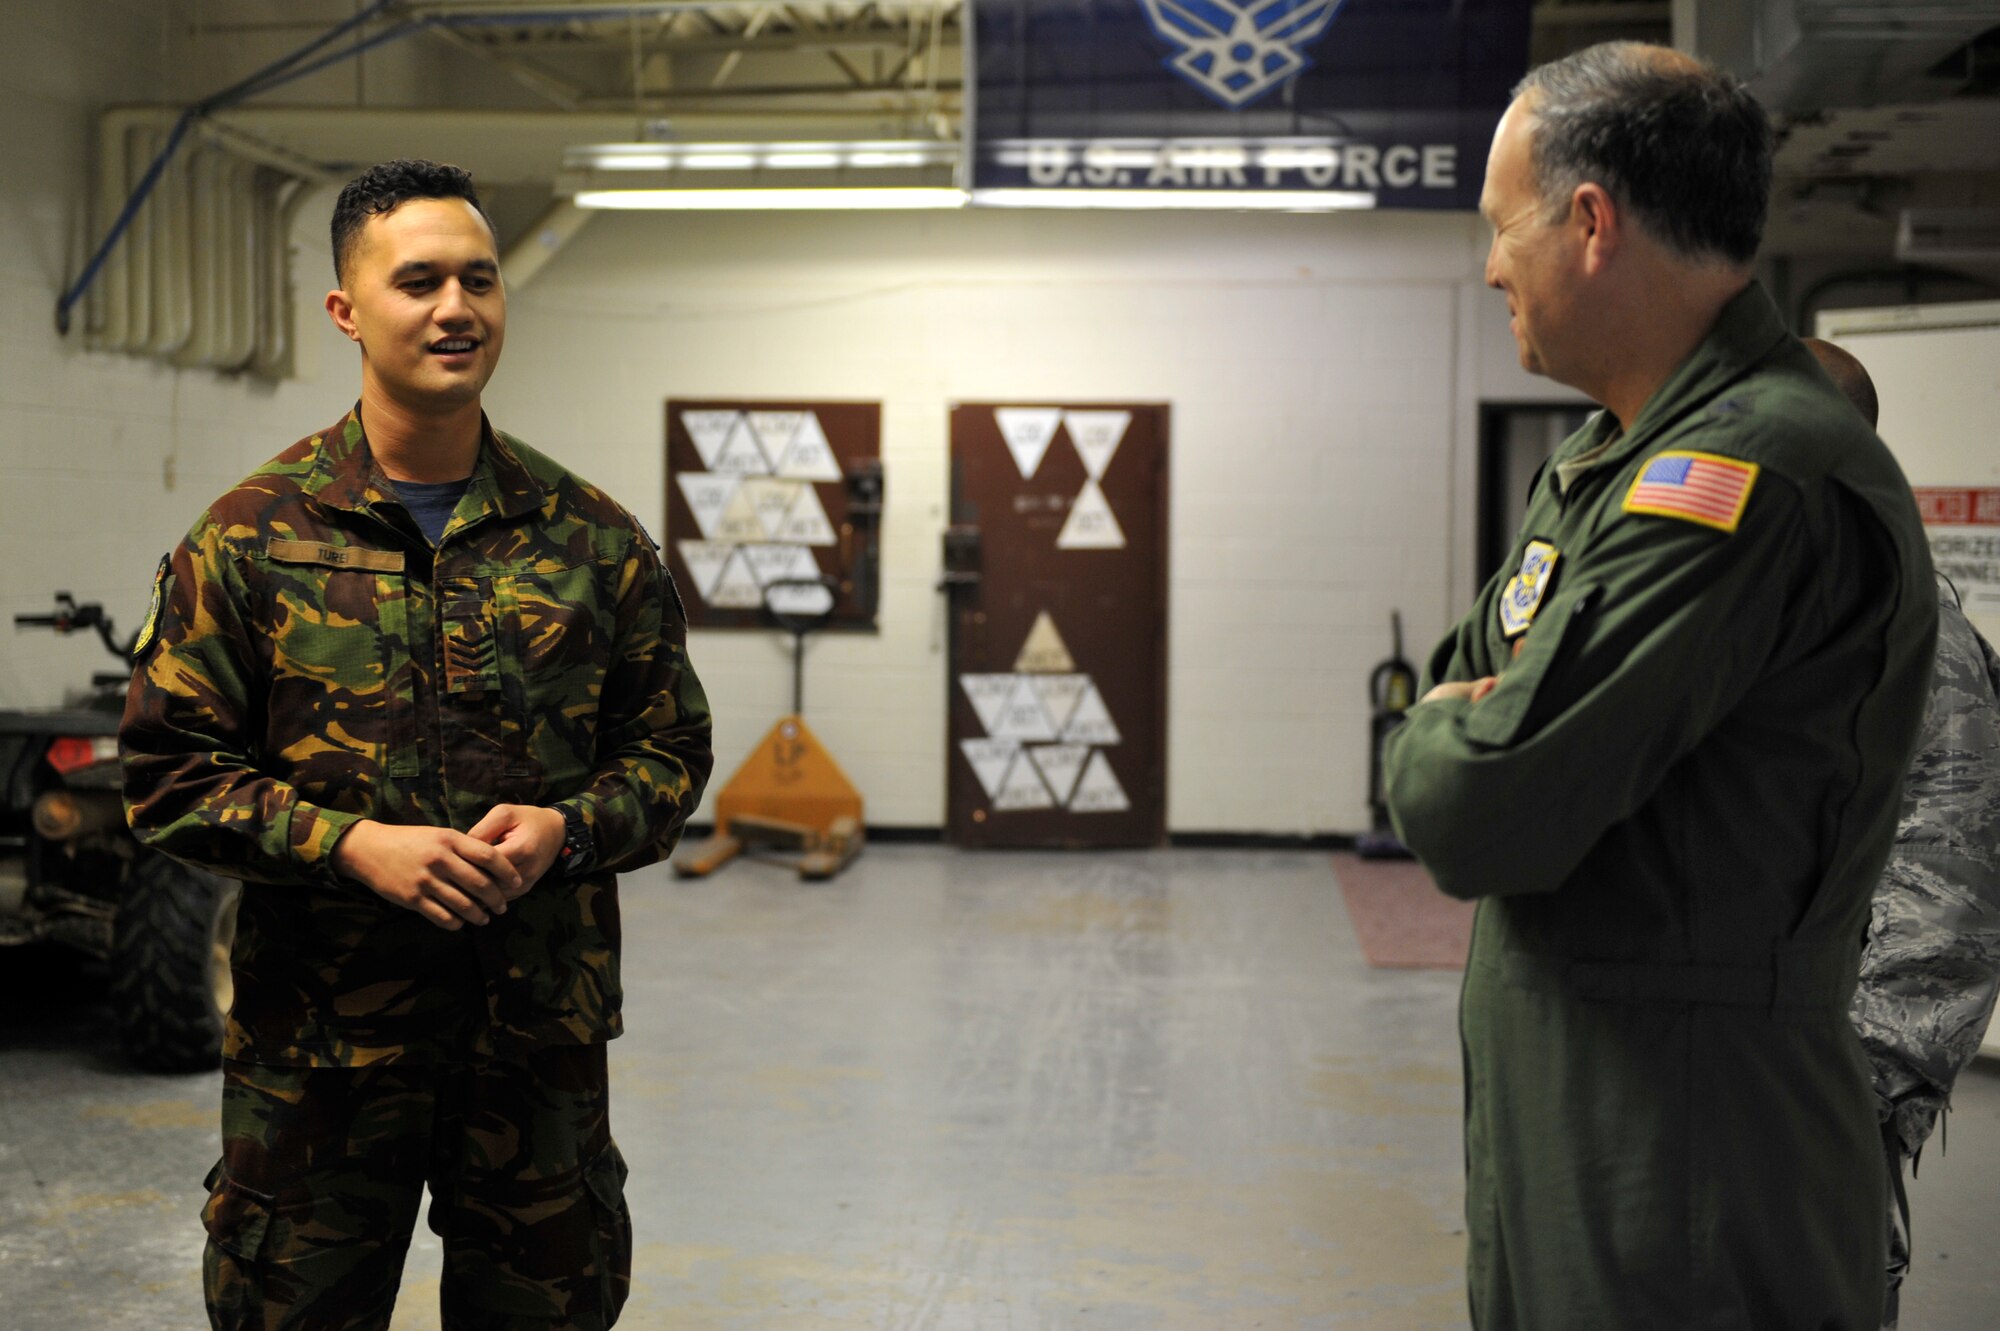 U.S. Air Force Maj. Gen. Jerry Martinez, Air Mobility Command Director of Operations, meets with Royal New Zealand Air Force SERE instructor Sgt. Ryan Turei, April 18, 2016, at Fort Polk, La., during Green Flag 16-06.  Turei worked with Little Rock AFB SERE specialist throughout the week sharing best practices from both countries.  The Royal Australian Air Force, Royal New Zealand Air Force and U.S. Air Force train during Green Flag Little Rock to ensure all aircrew can effectively communicate. (U.S. Air Force photo by Staff Sgt. Jeremy McGuffin)